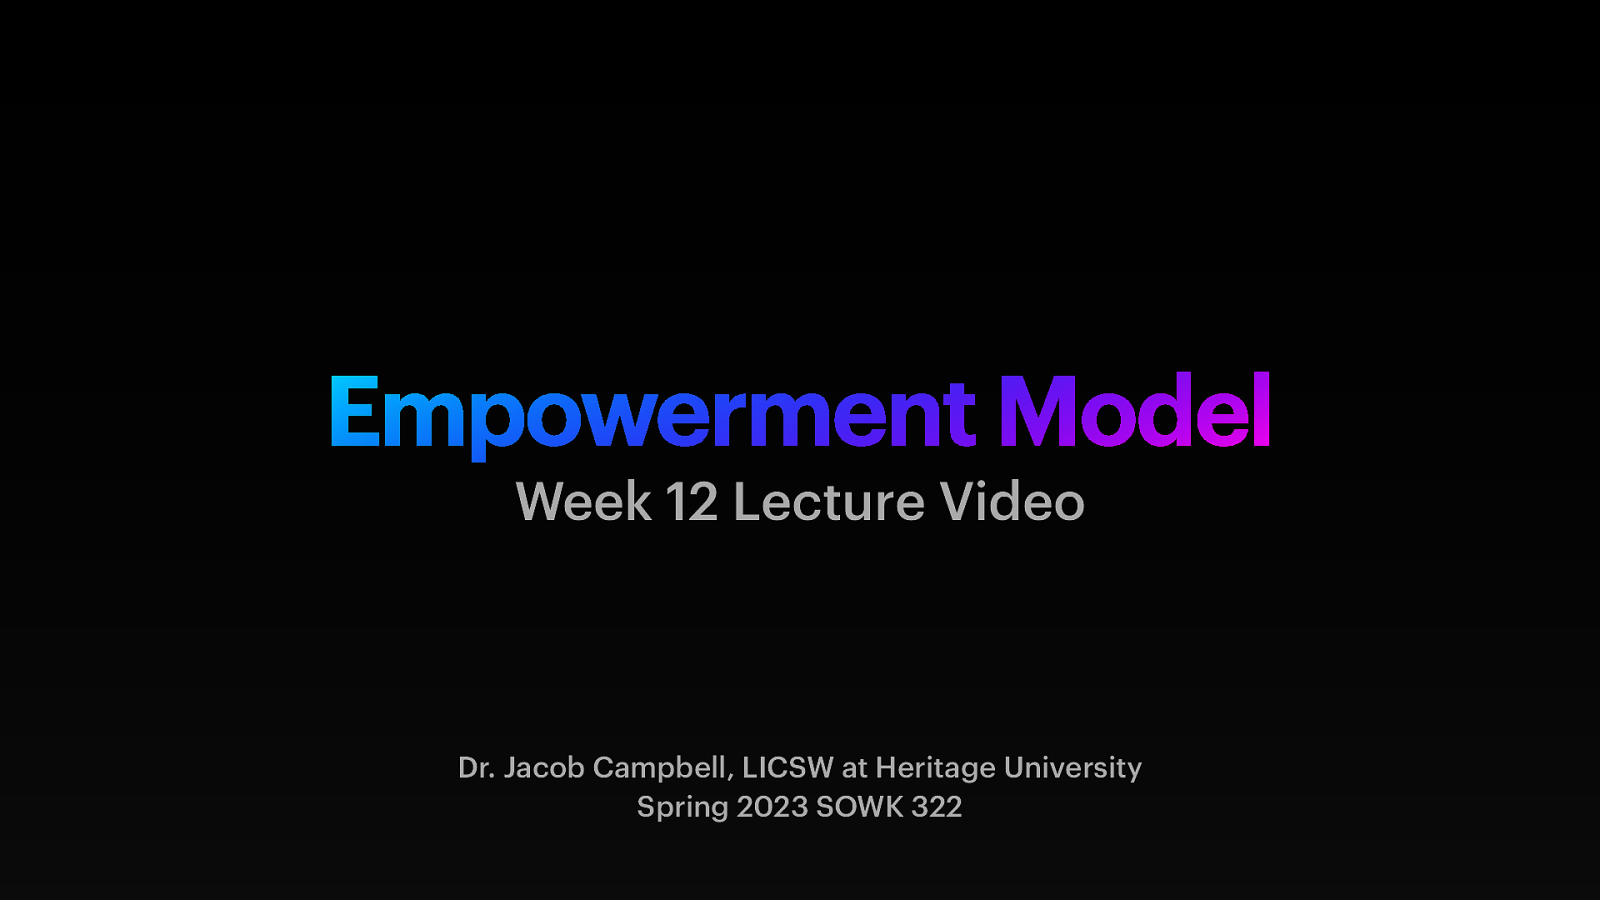 Spring 2023 SOWK 322 Week 12 Lecture Video and the Empowerment Model